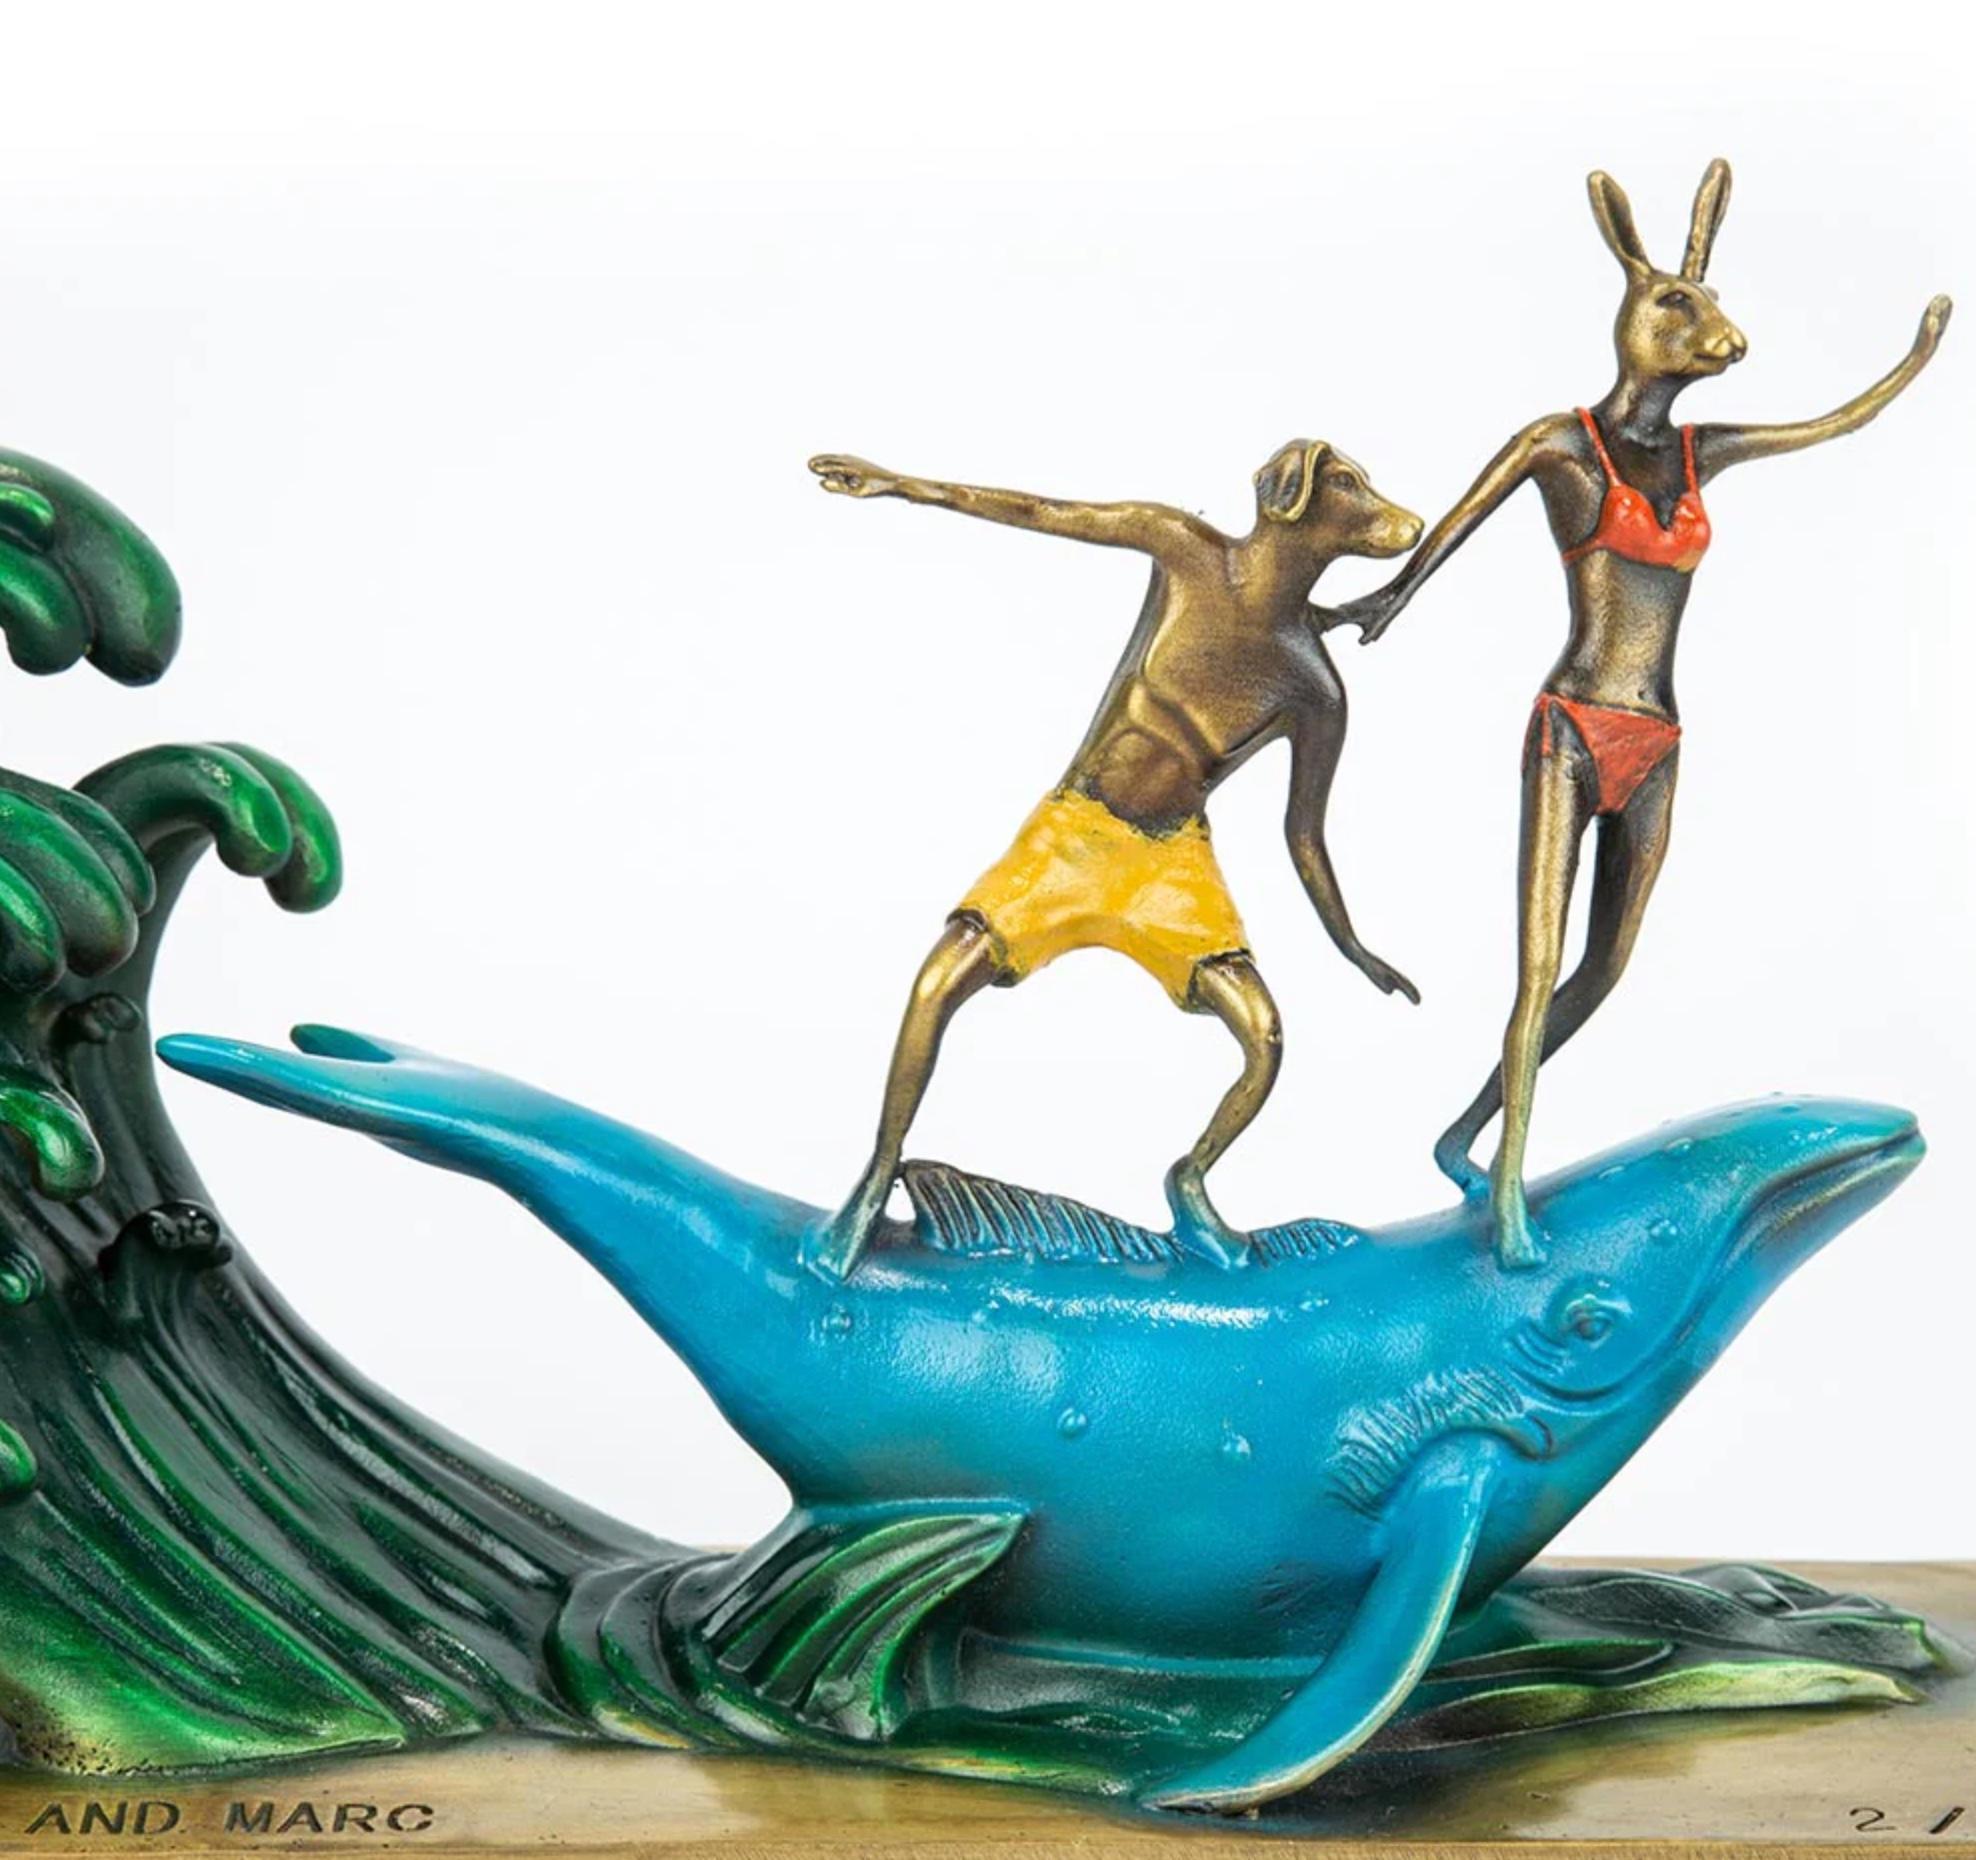 Title: They had a whale of an adventure on a grand scale
Authentic bronze sculpture

This authentic bronze sculpture titled 'They had a whale of an adventure on a grand scale' by artists Gillie and Marc has been meticulously crafted in bronze with